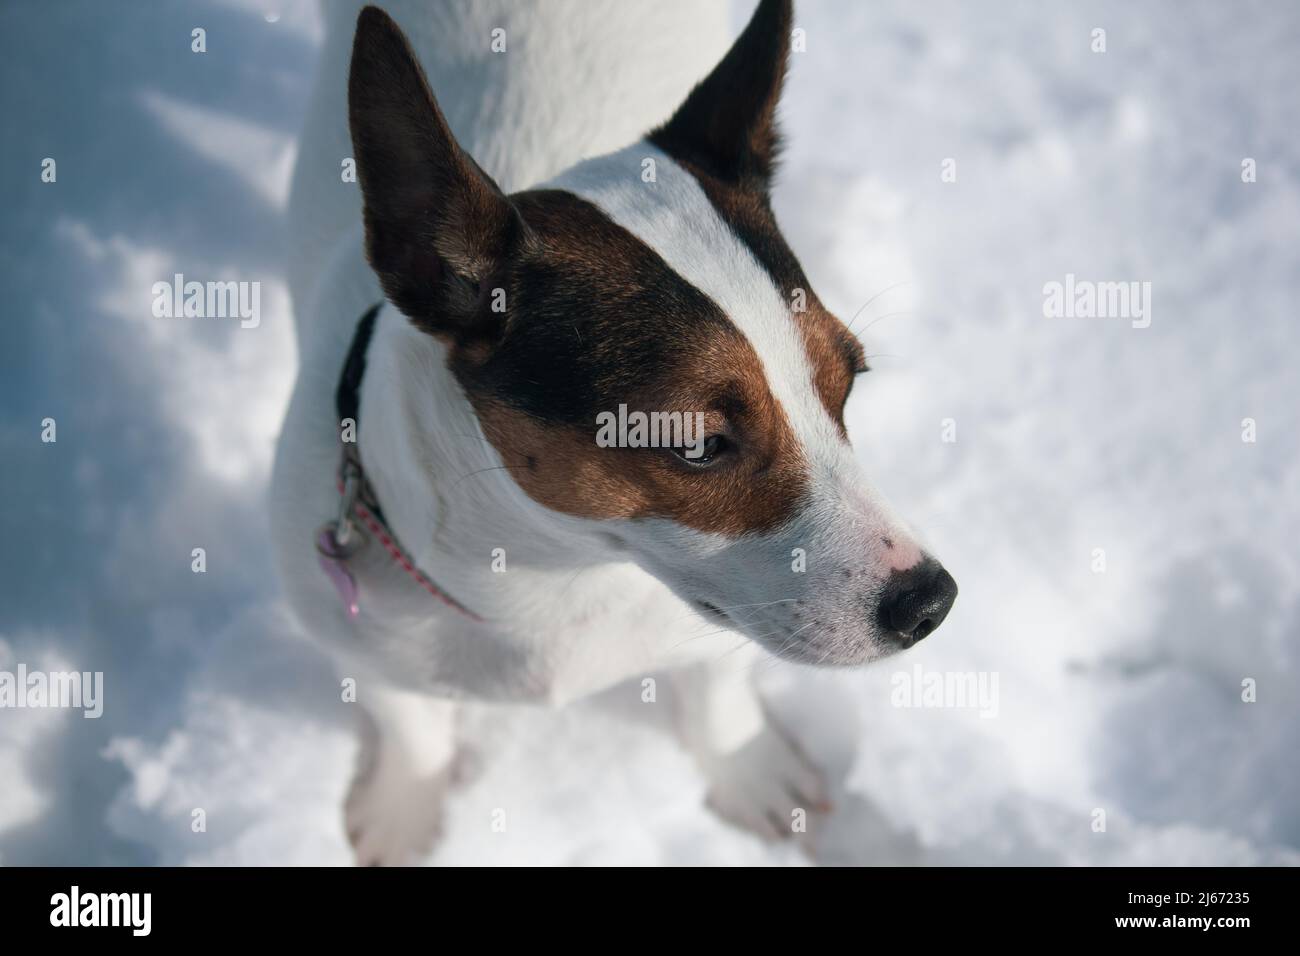 Jack Russell Terrier dog standing in snow Stock Photo